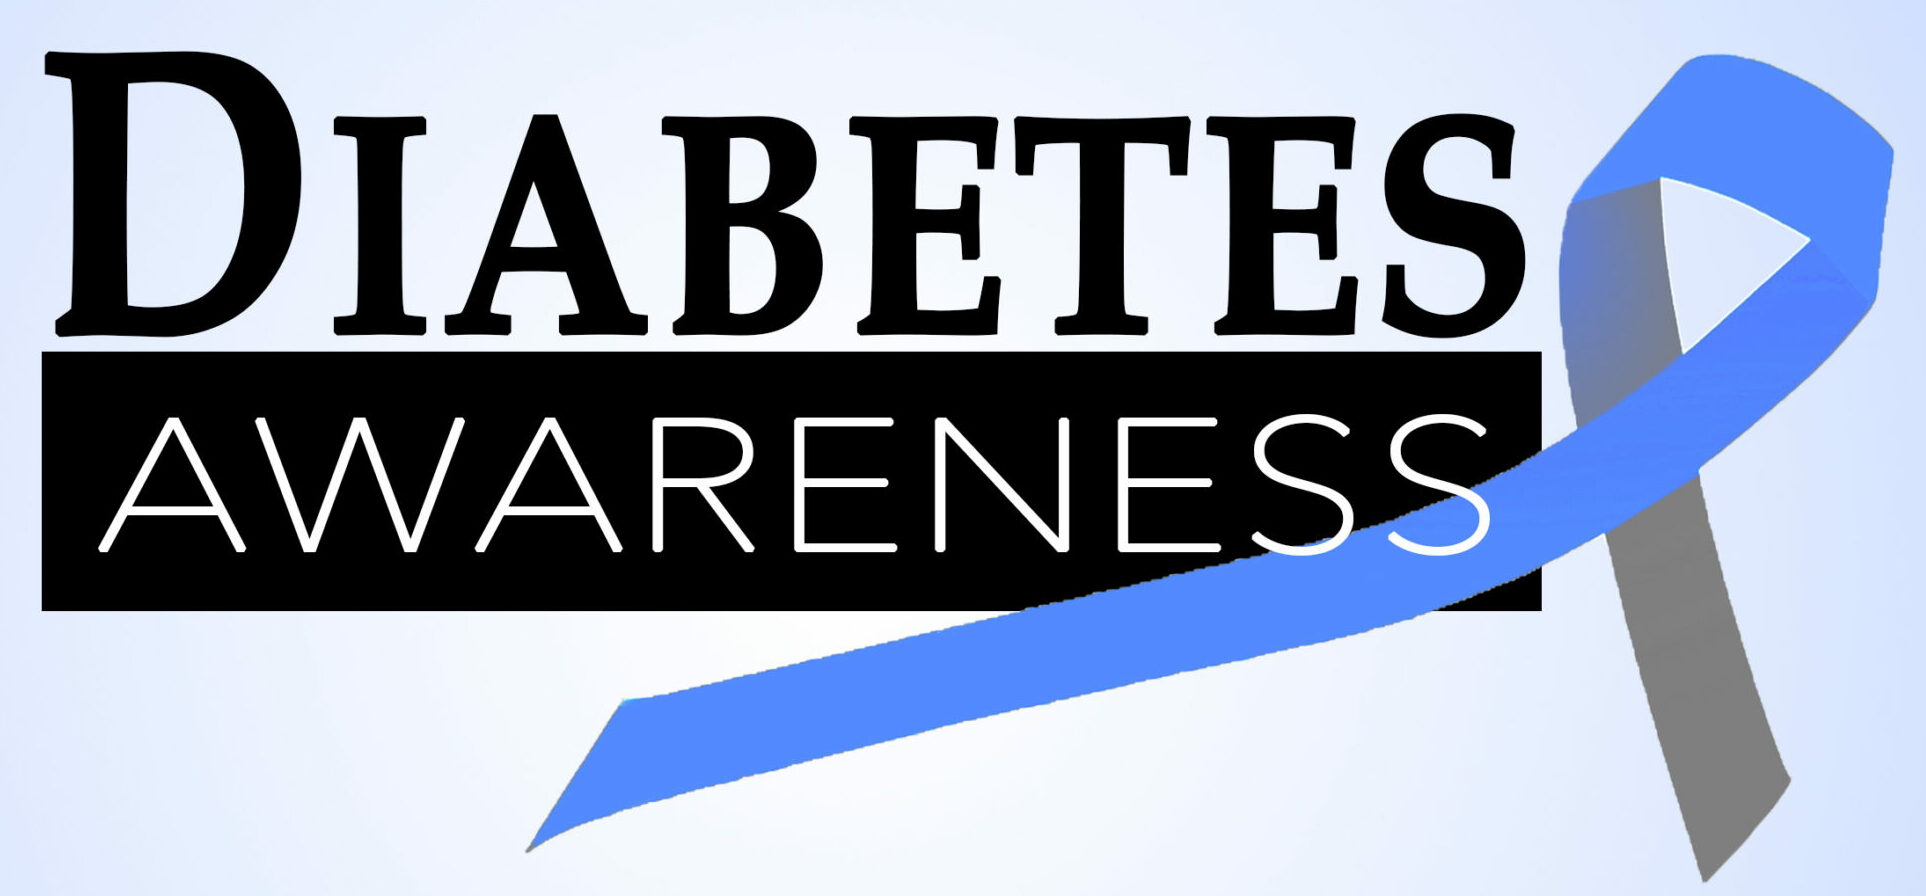 Diabetes awareness with blue and grey ribbon